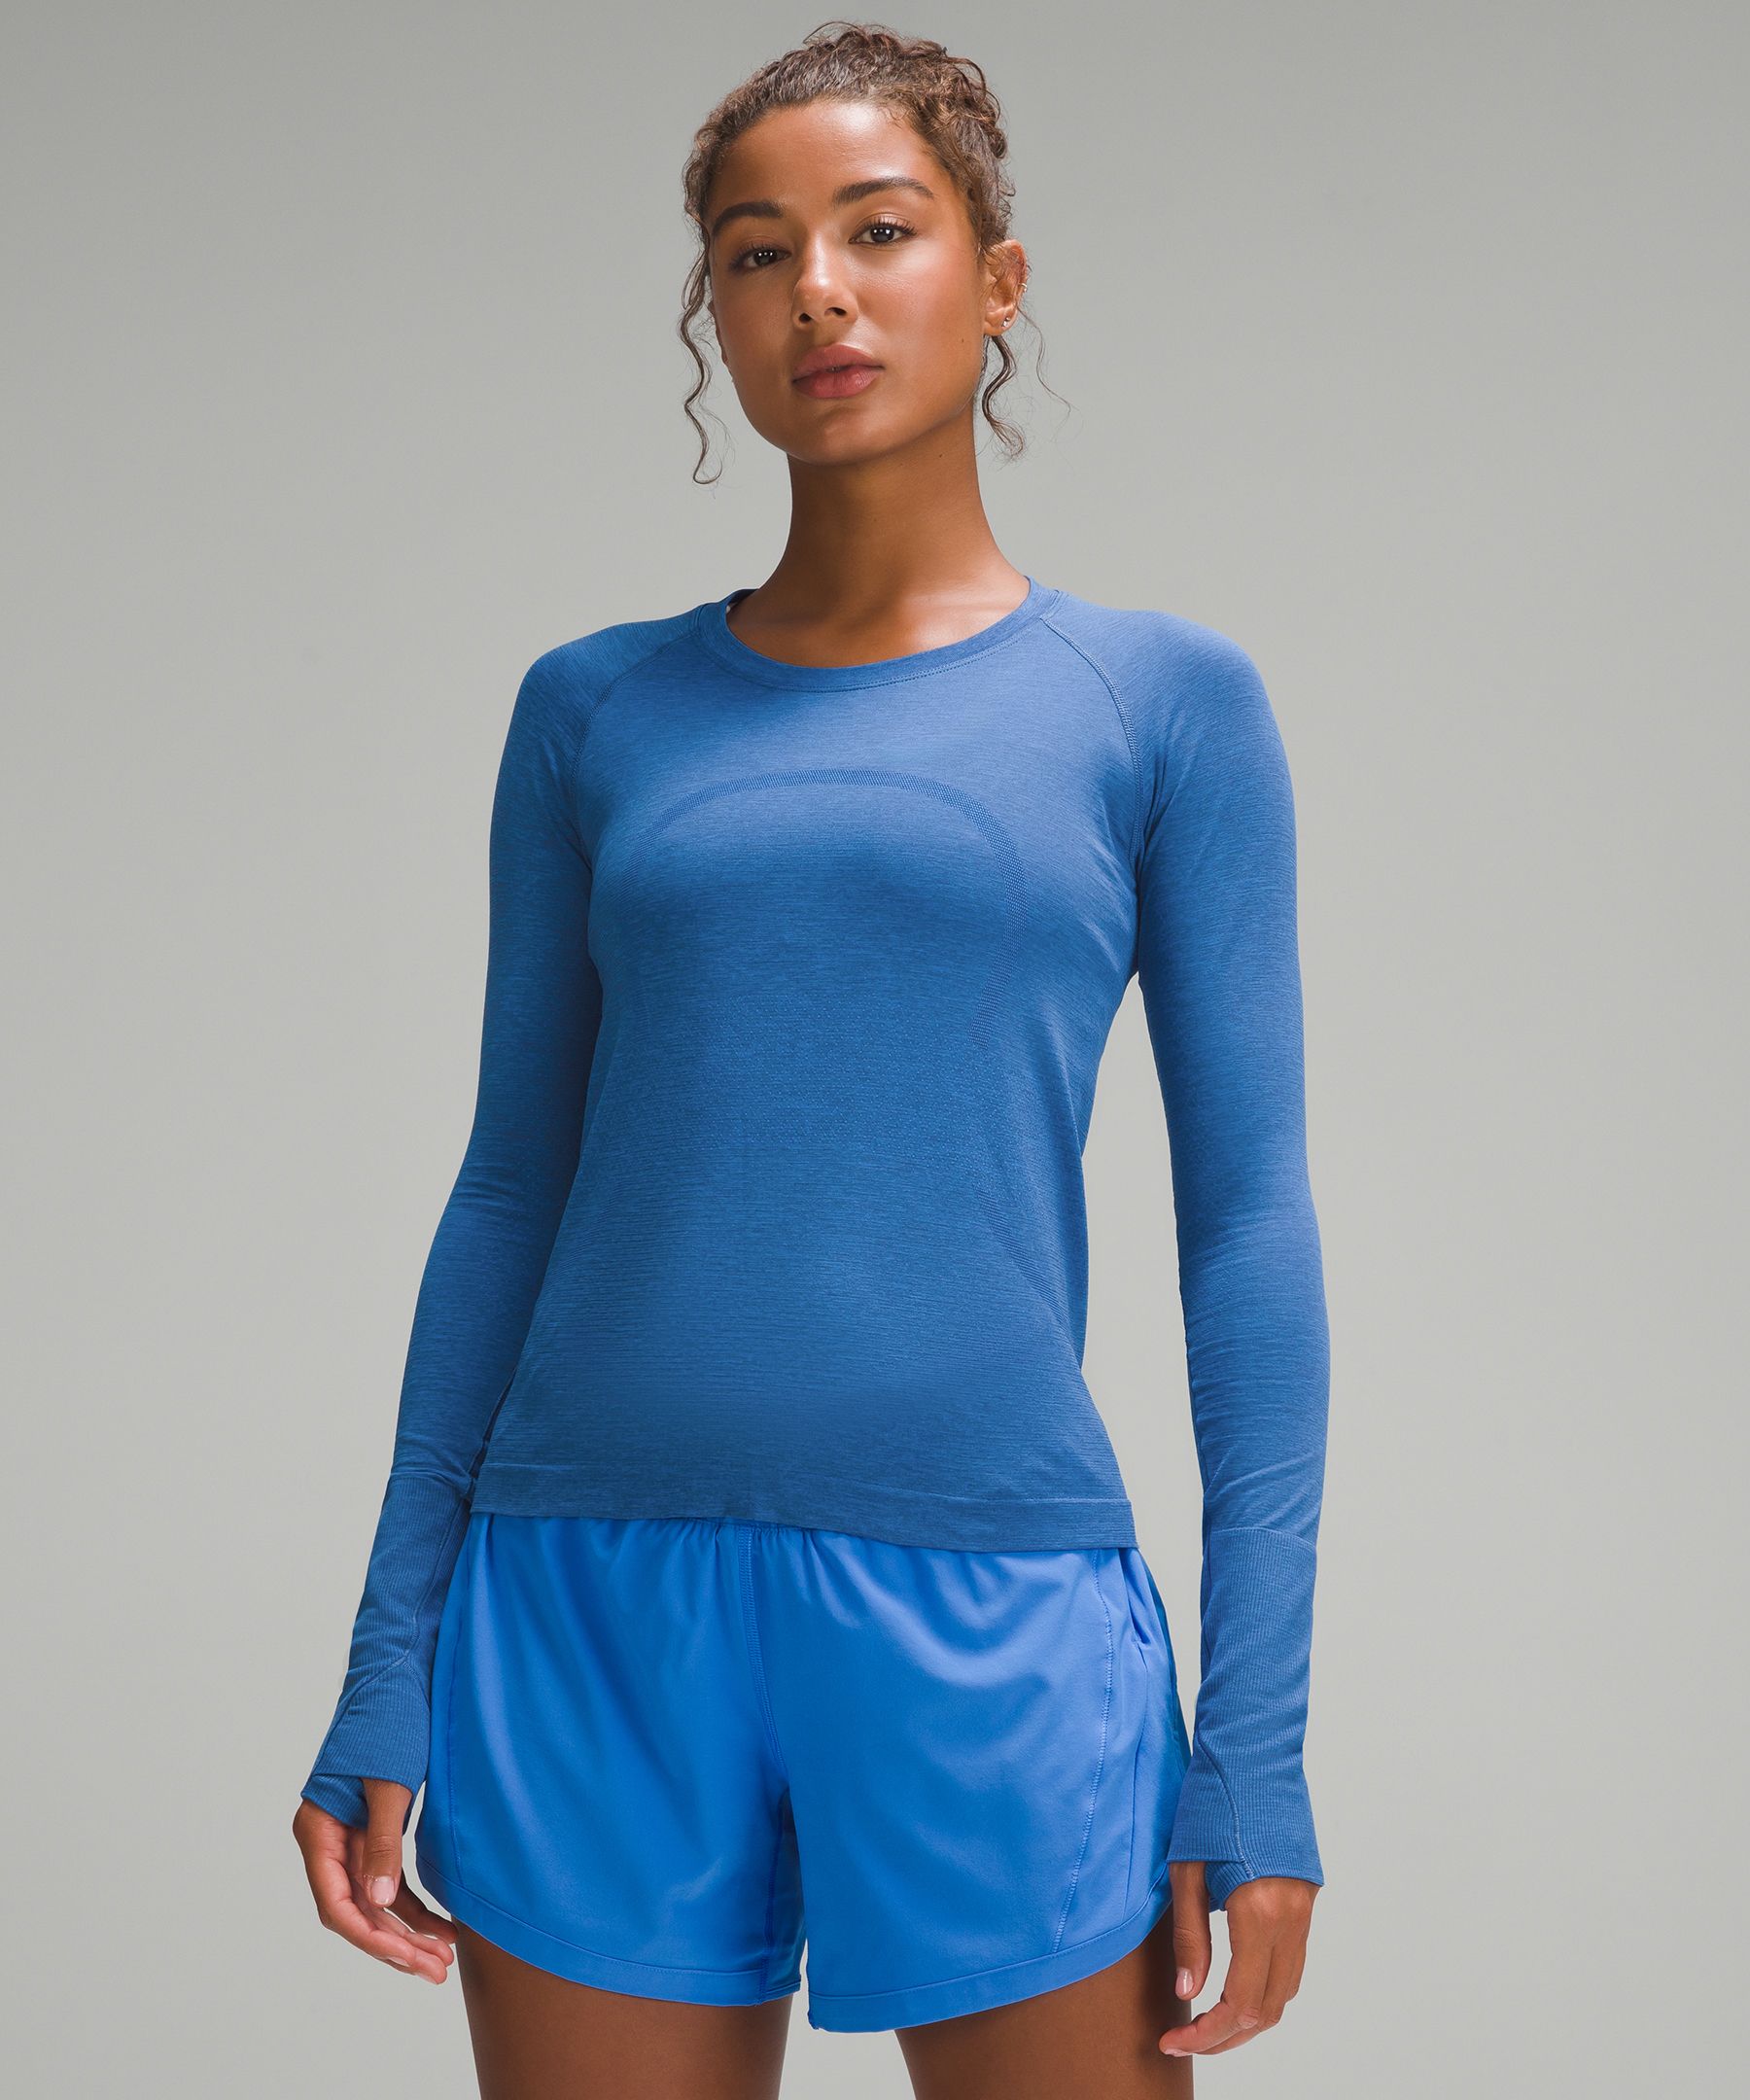 Tech Thermal Long Sleeve Top, Blue